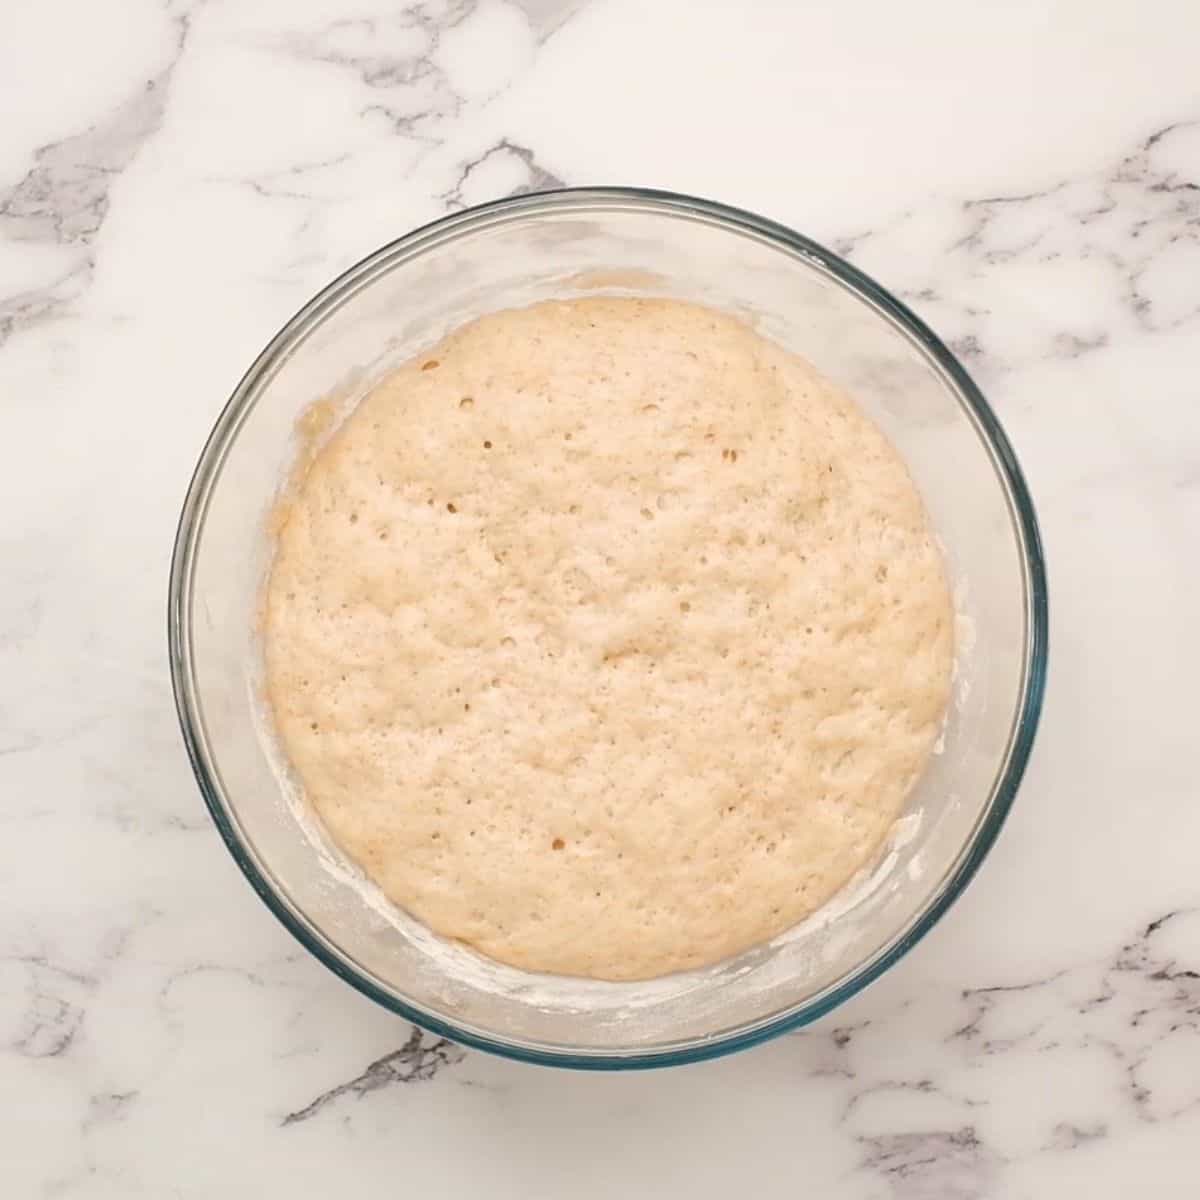 Bread dough in glass mixing bowl.